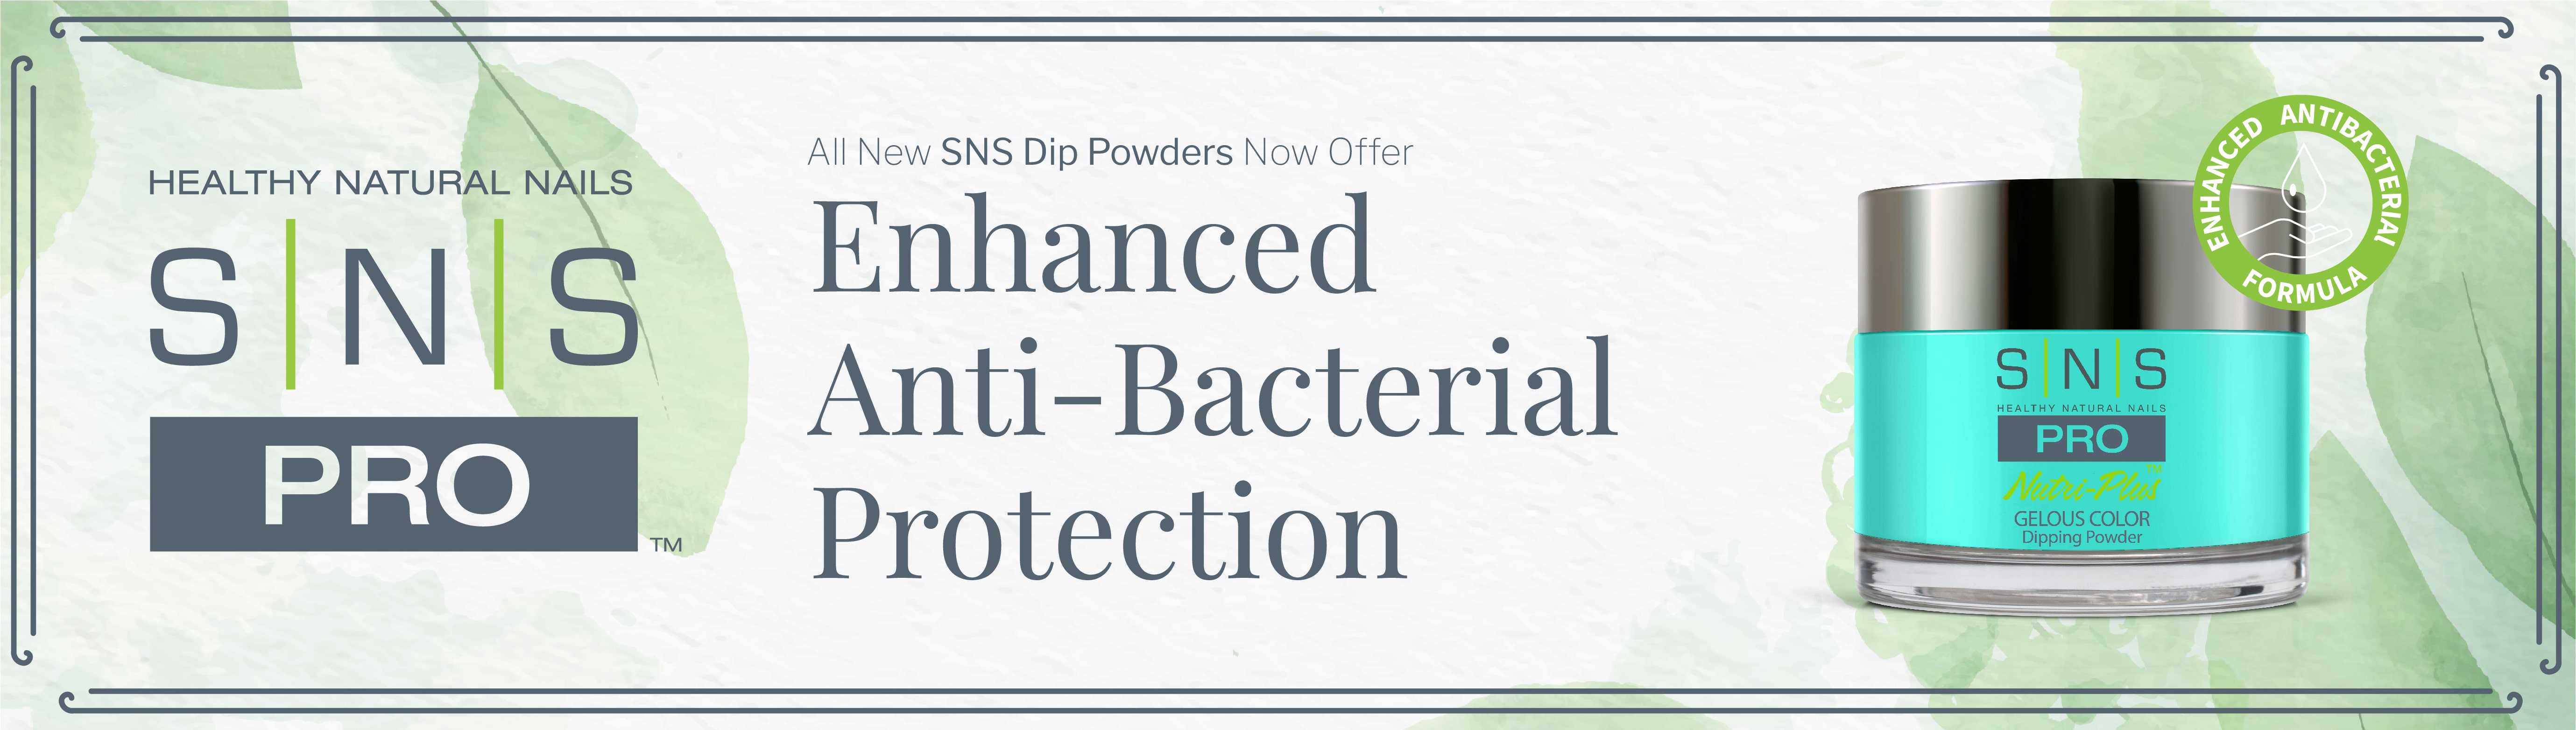 SNS Adds a New Enhanced Antibacterial Formula to Its Award-winning Dip Powder Systems 